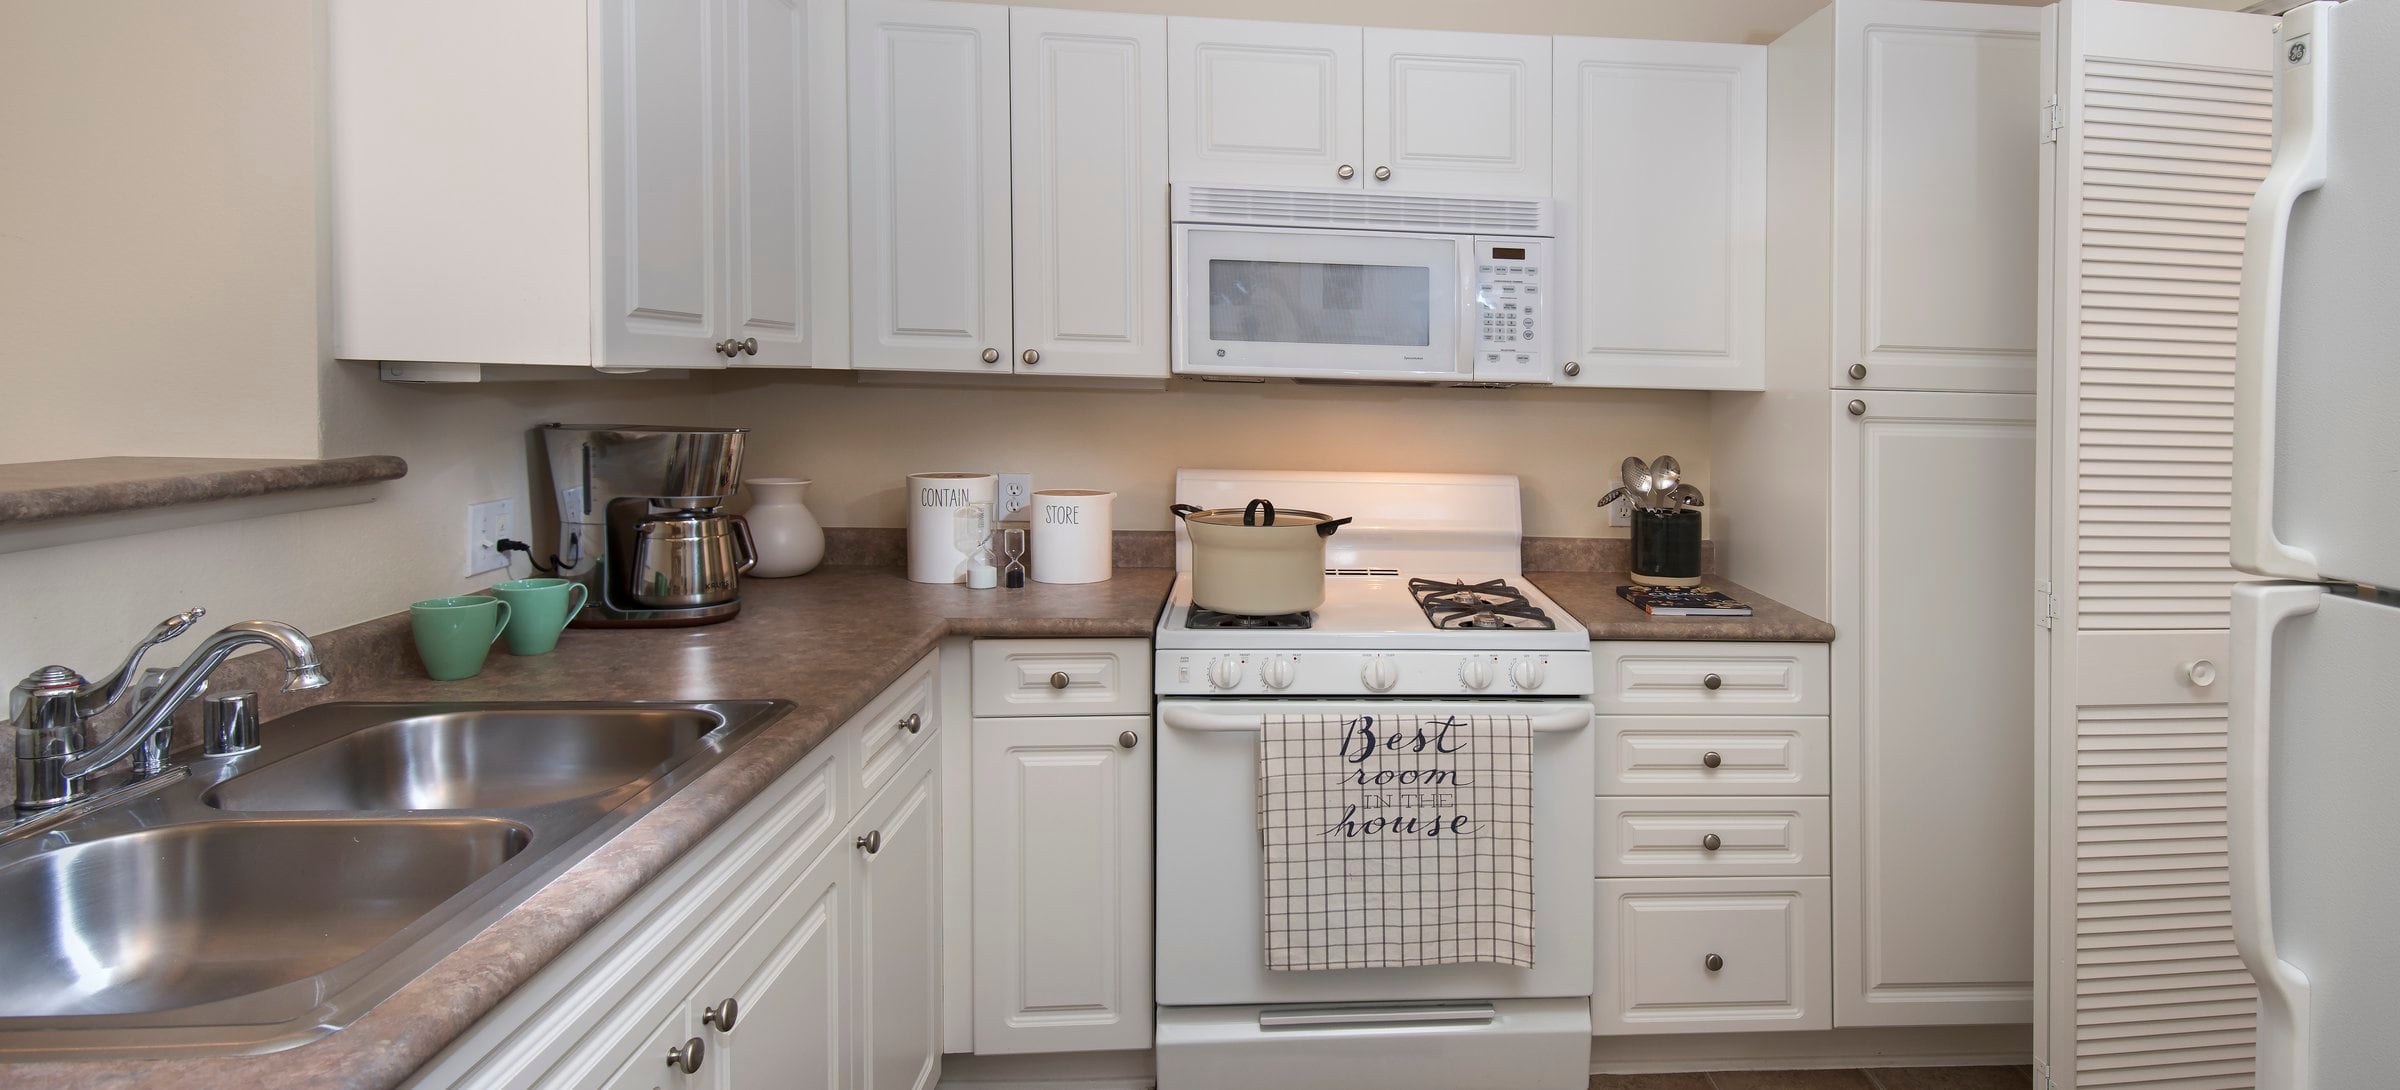 Classic Package I kitchen with white cabinetry, white appliances, laminate countertops, and tile flooring